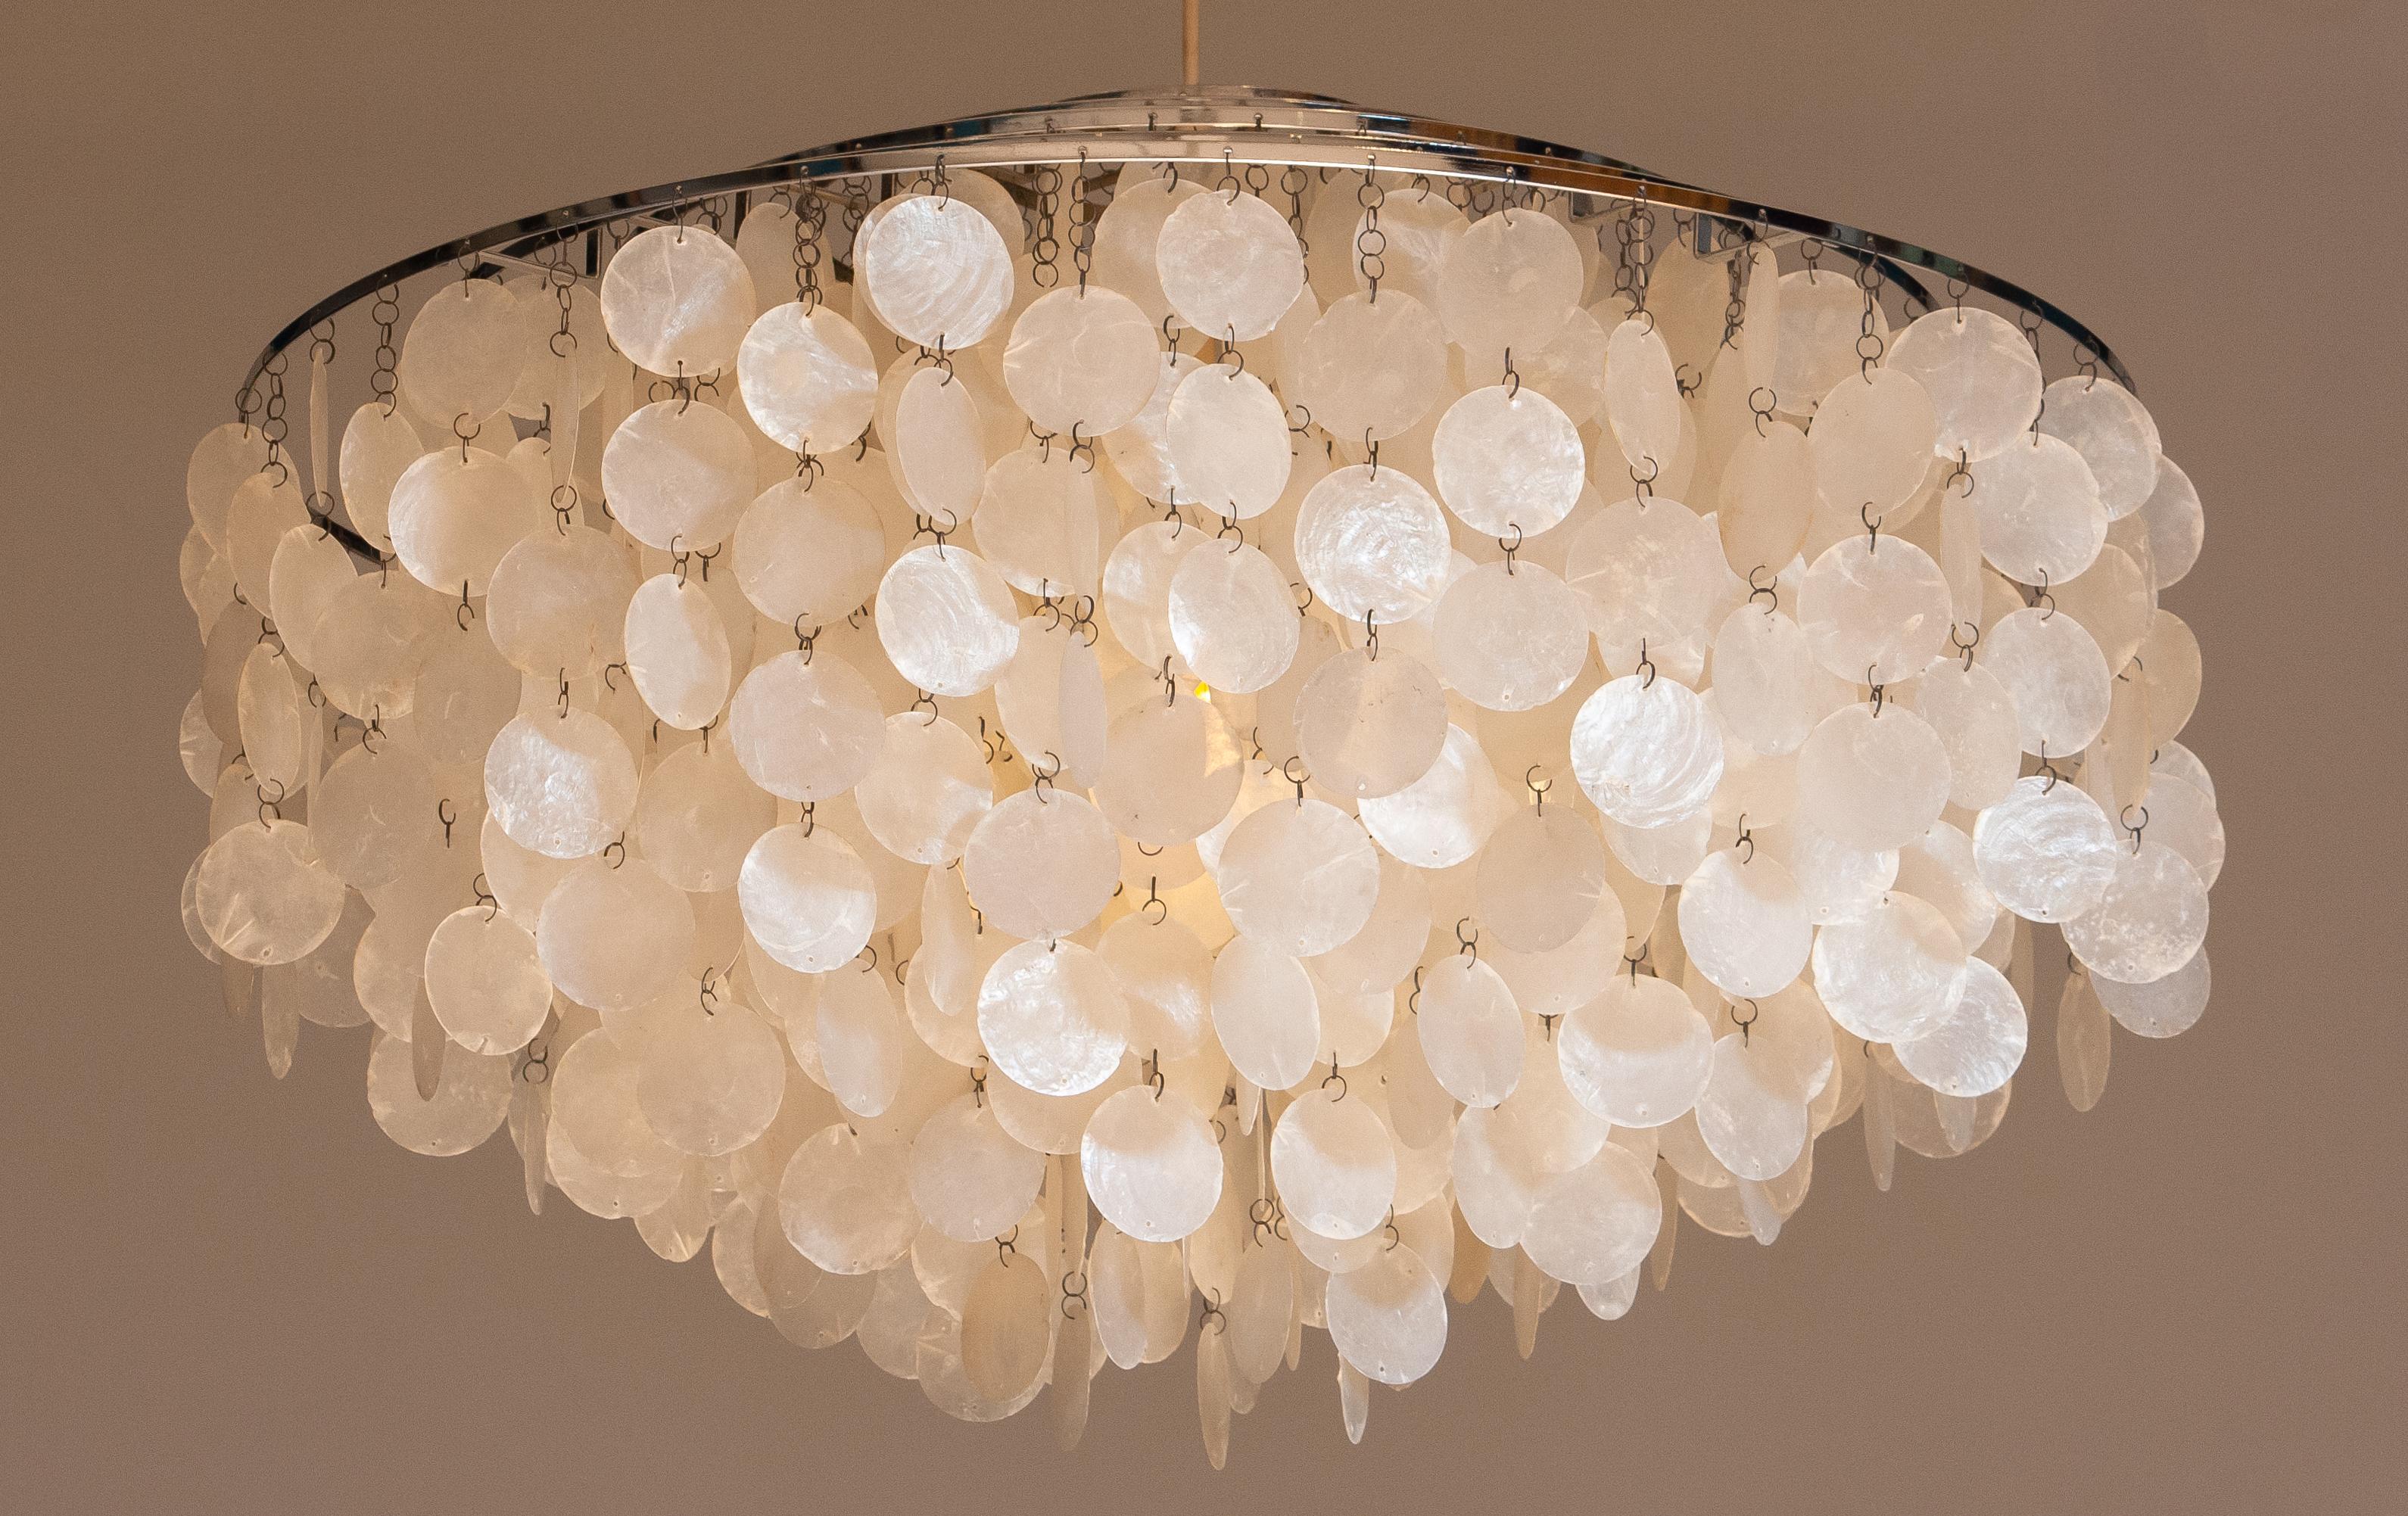 Pair of Extra Large Capiz Shell Chandeliers by Verner Panton for Luber AG. Swiss 2